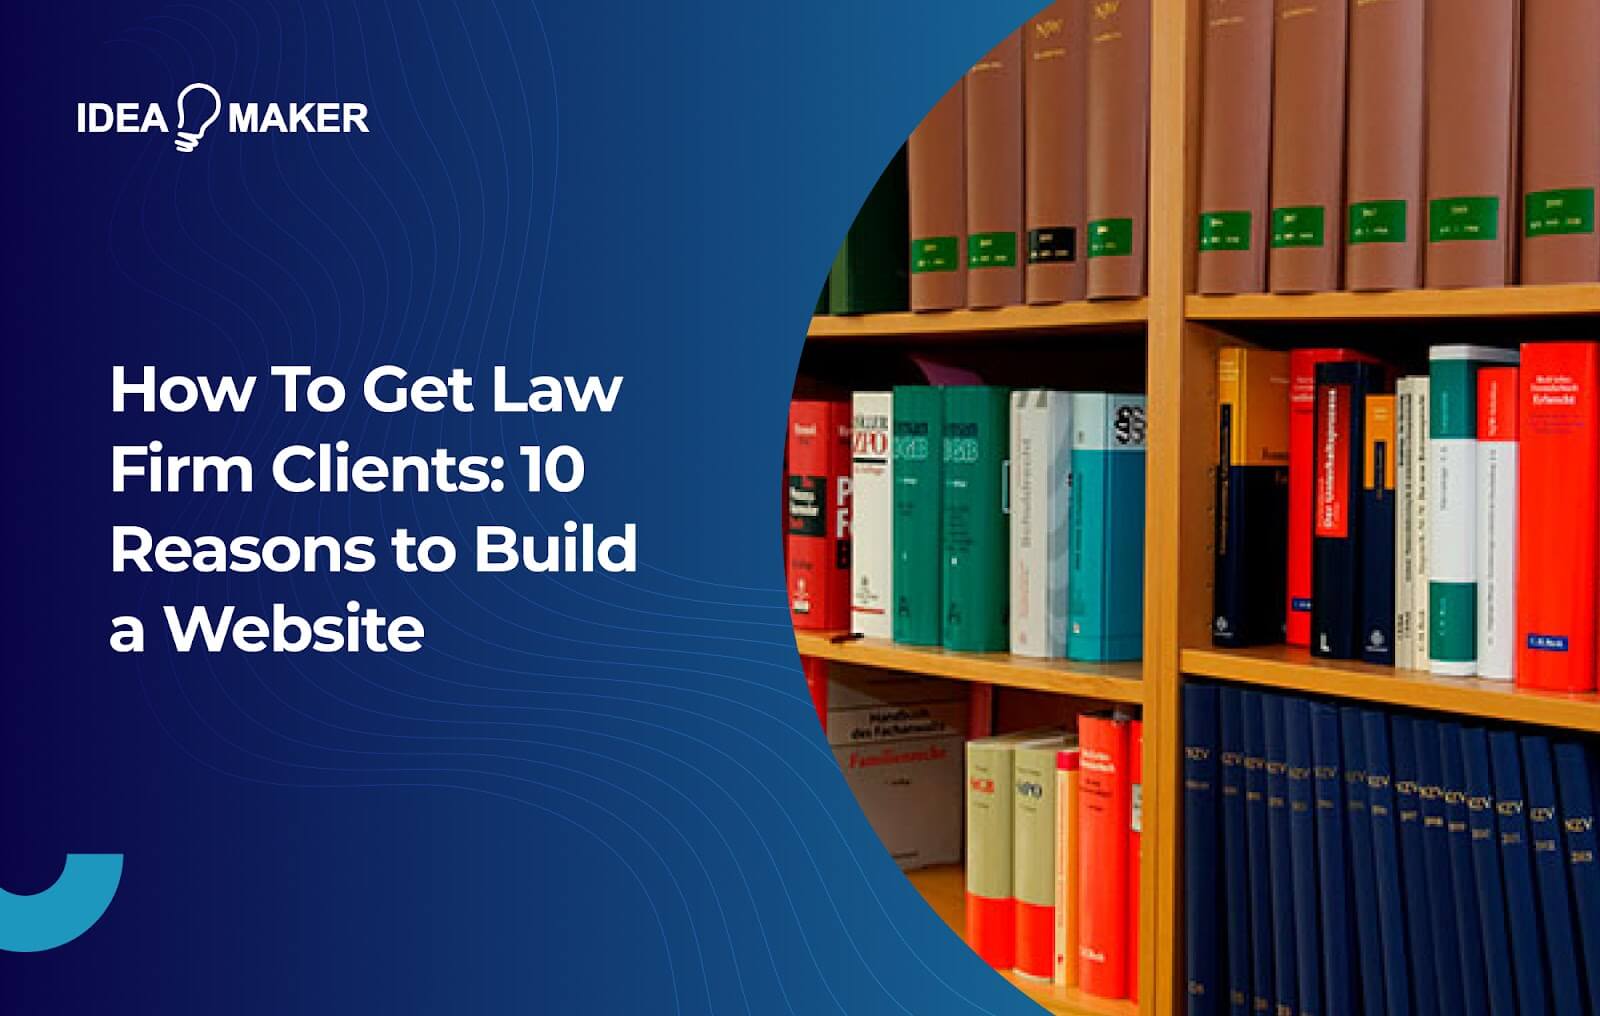 Ideamaker - How To Get Law Firm Clients